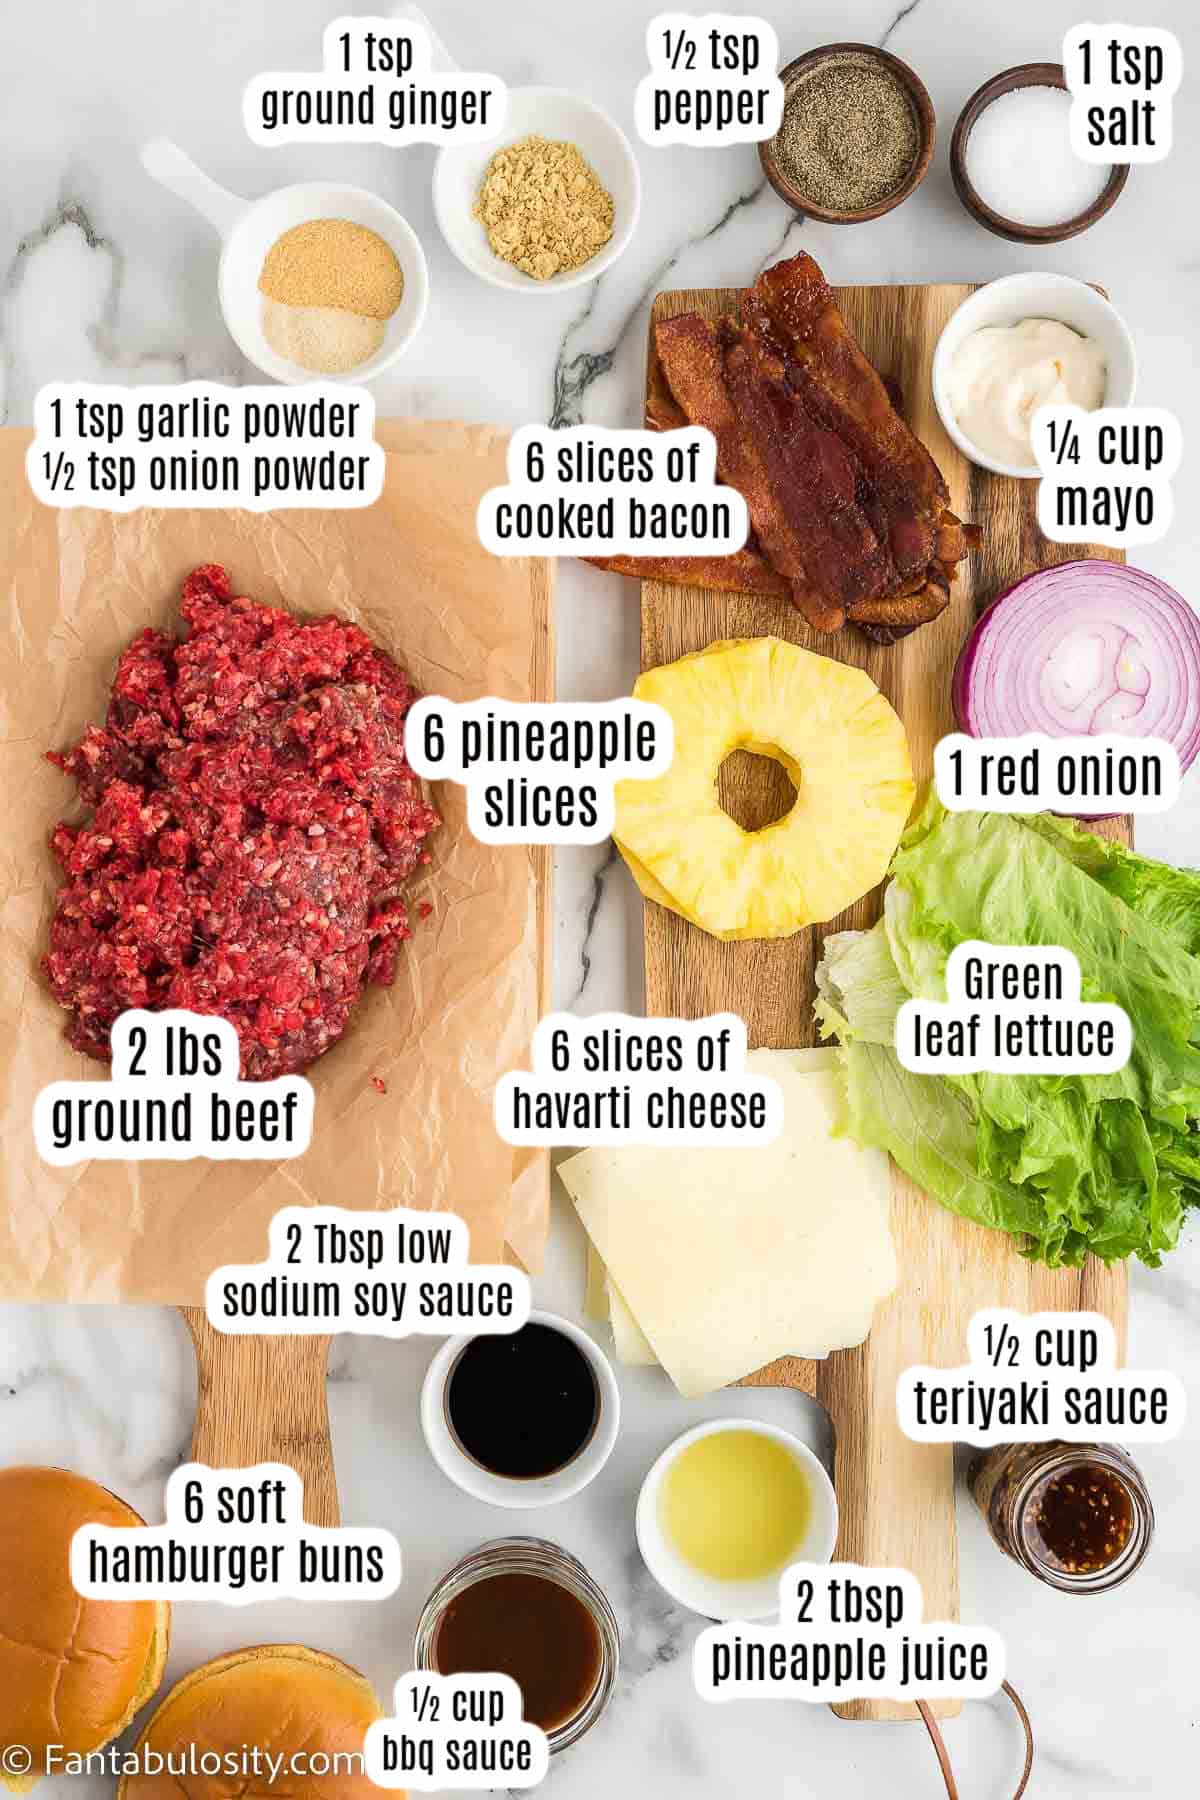 Labeled ingredients for Aloha burgers.